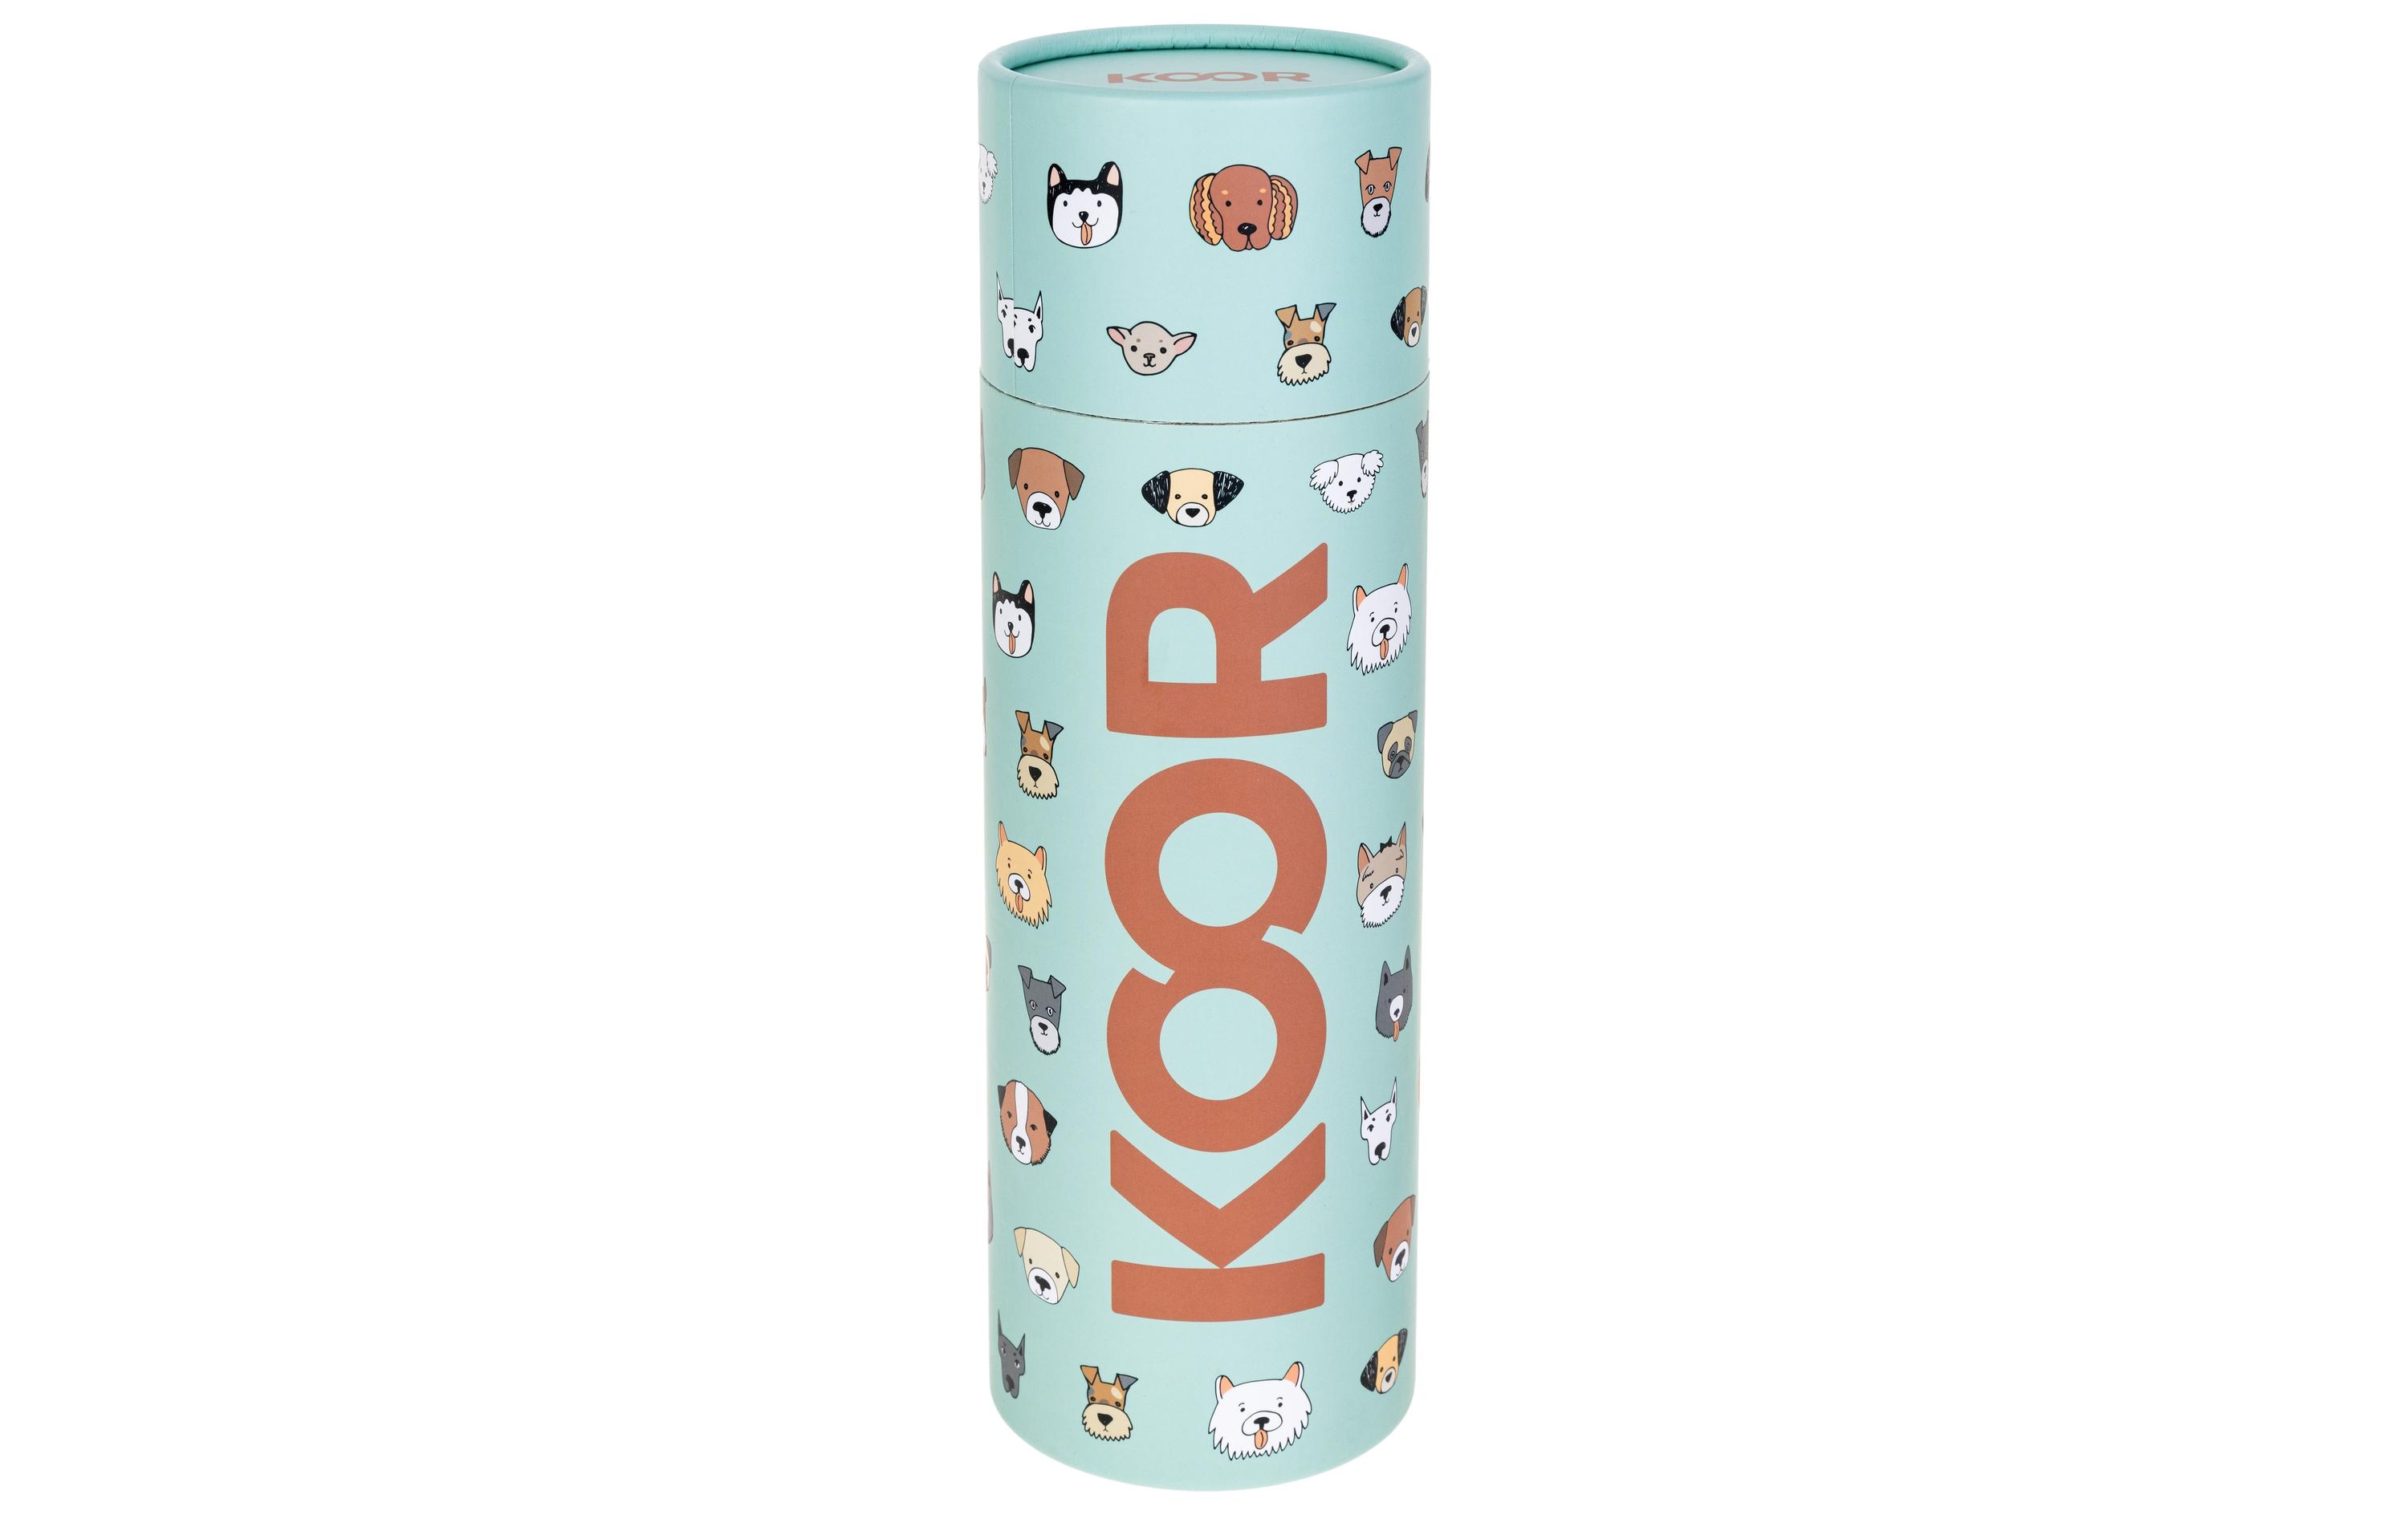 KOOR Flasche Thermo 500ml Dog Faces